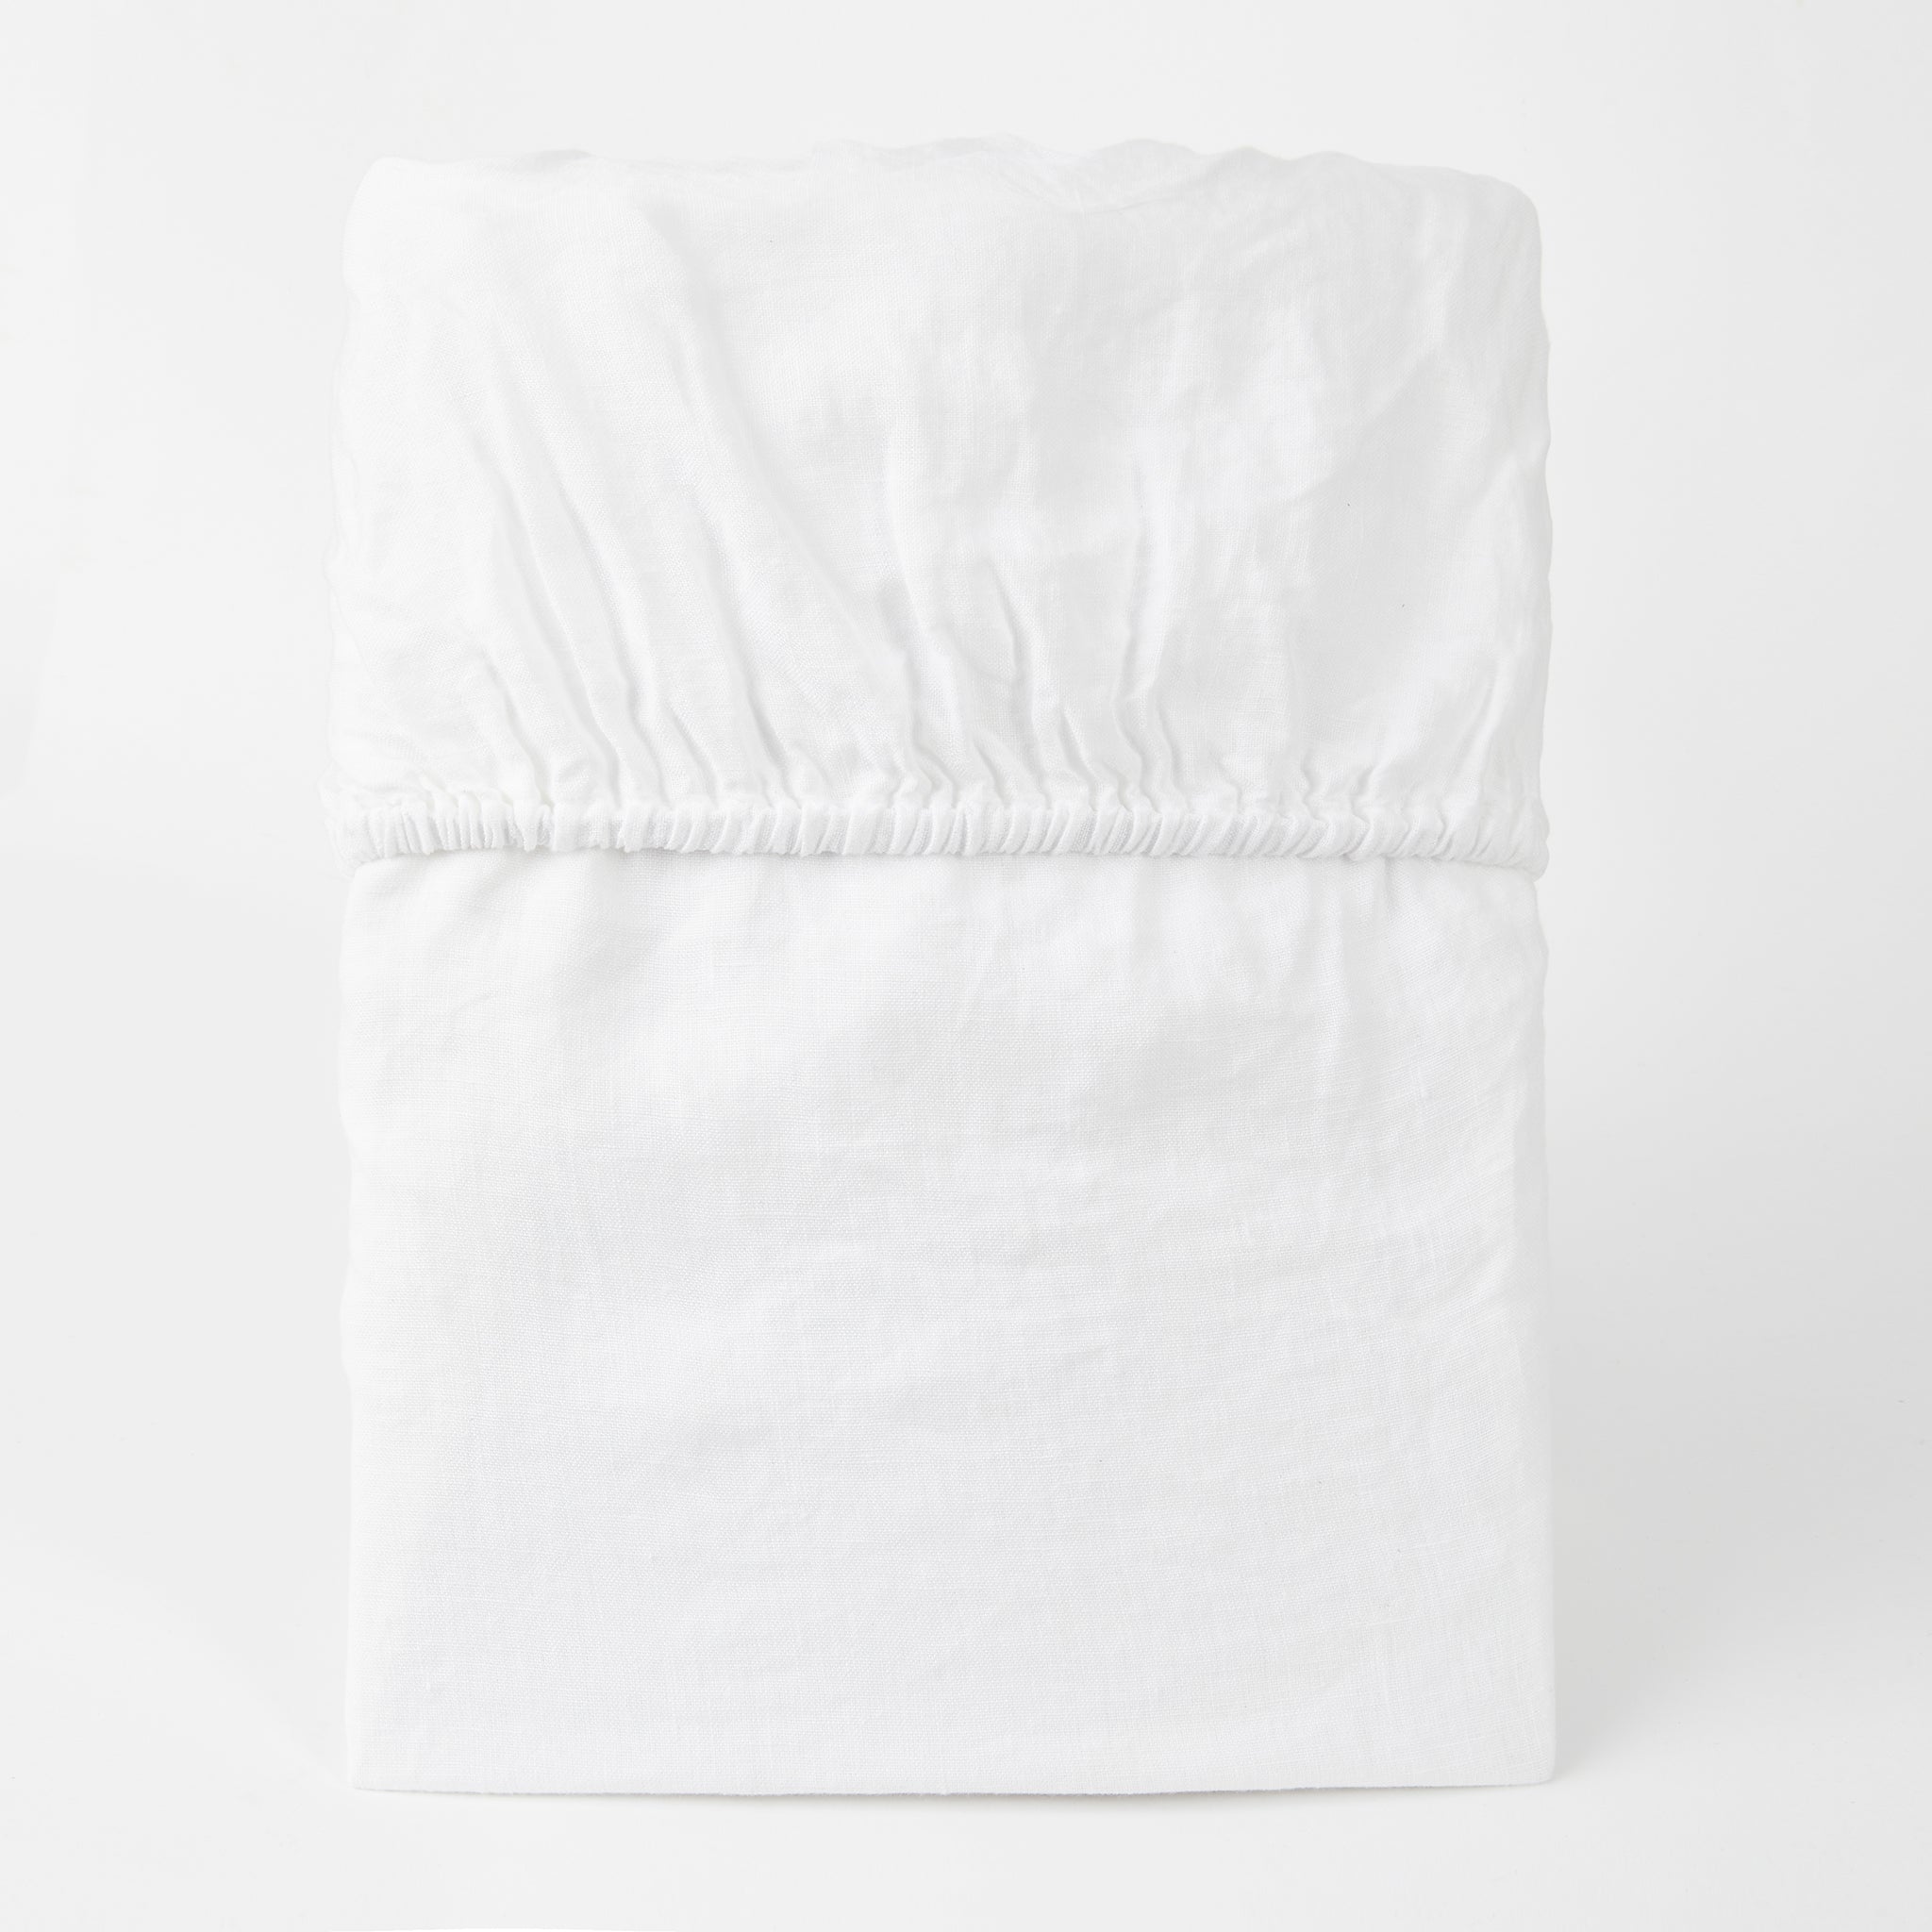 Stonewashed linen fitted sheet, white - By Native